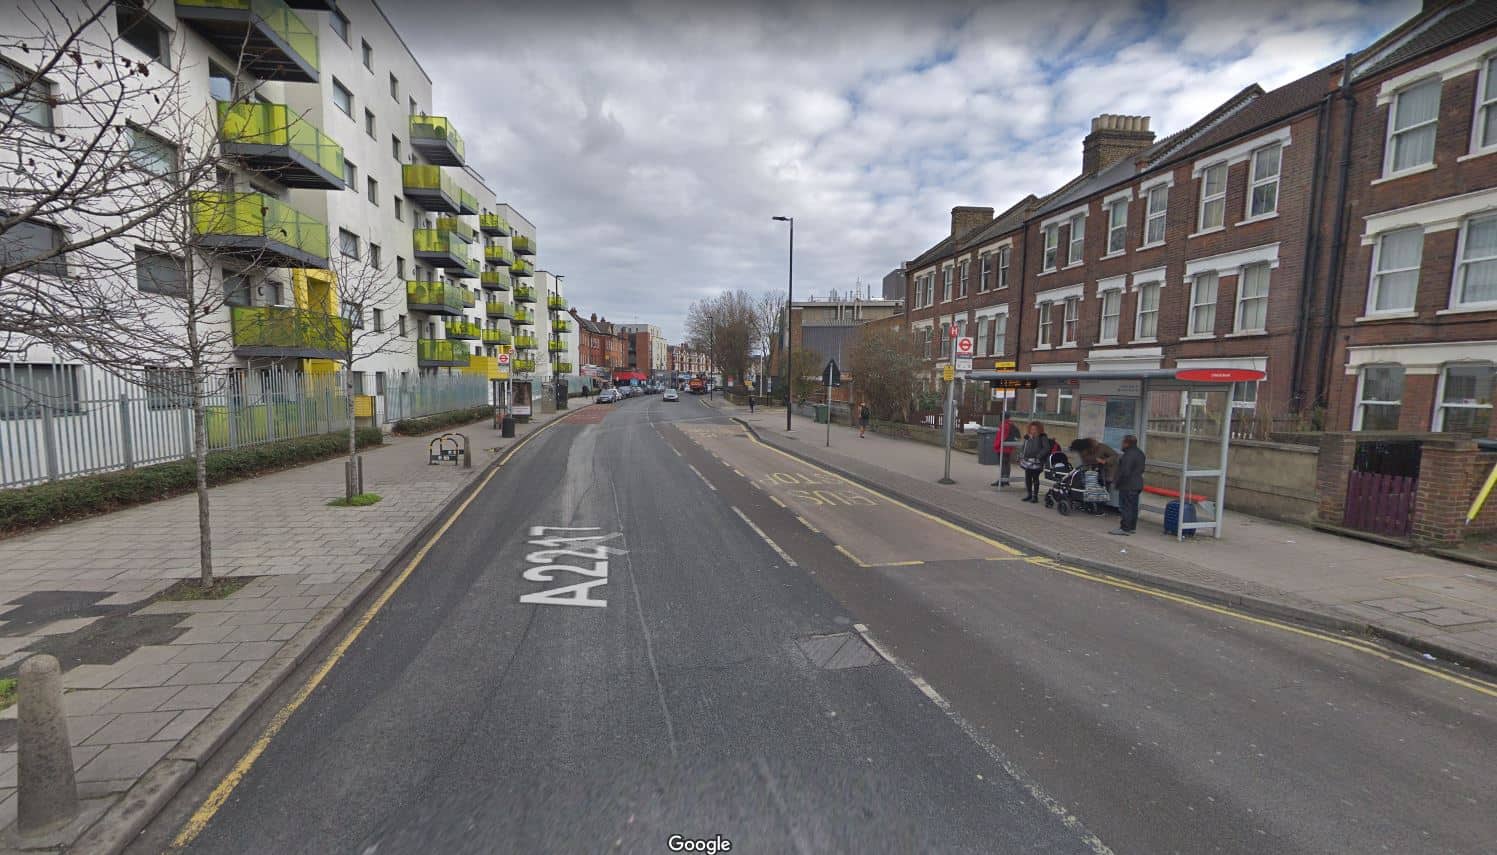 Coldharbour Lane runs from Camberwell to Brixton (Image: Google Maps)